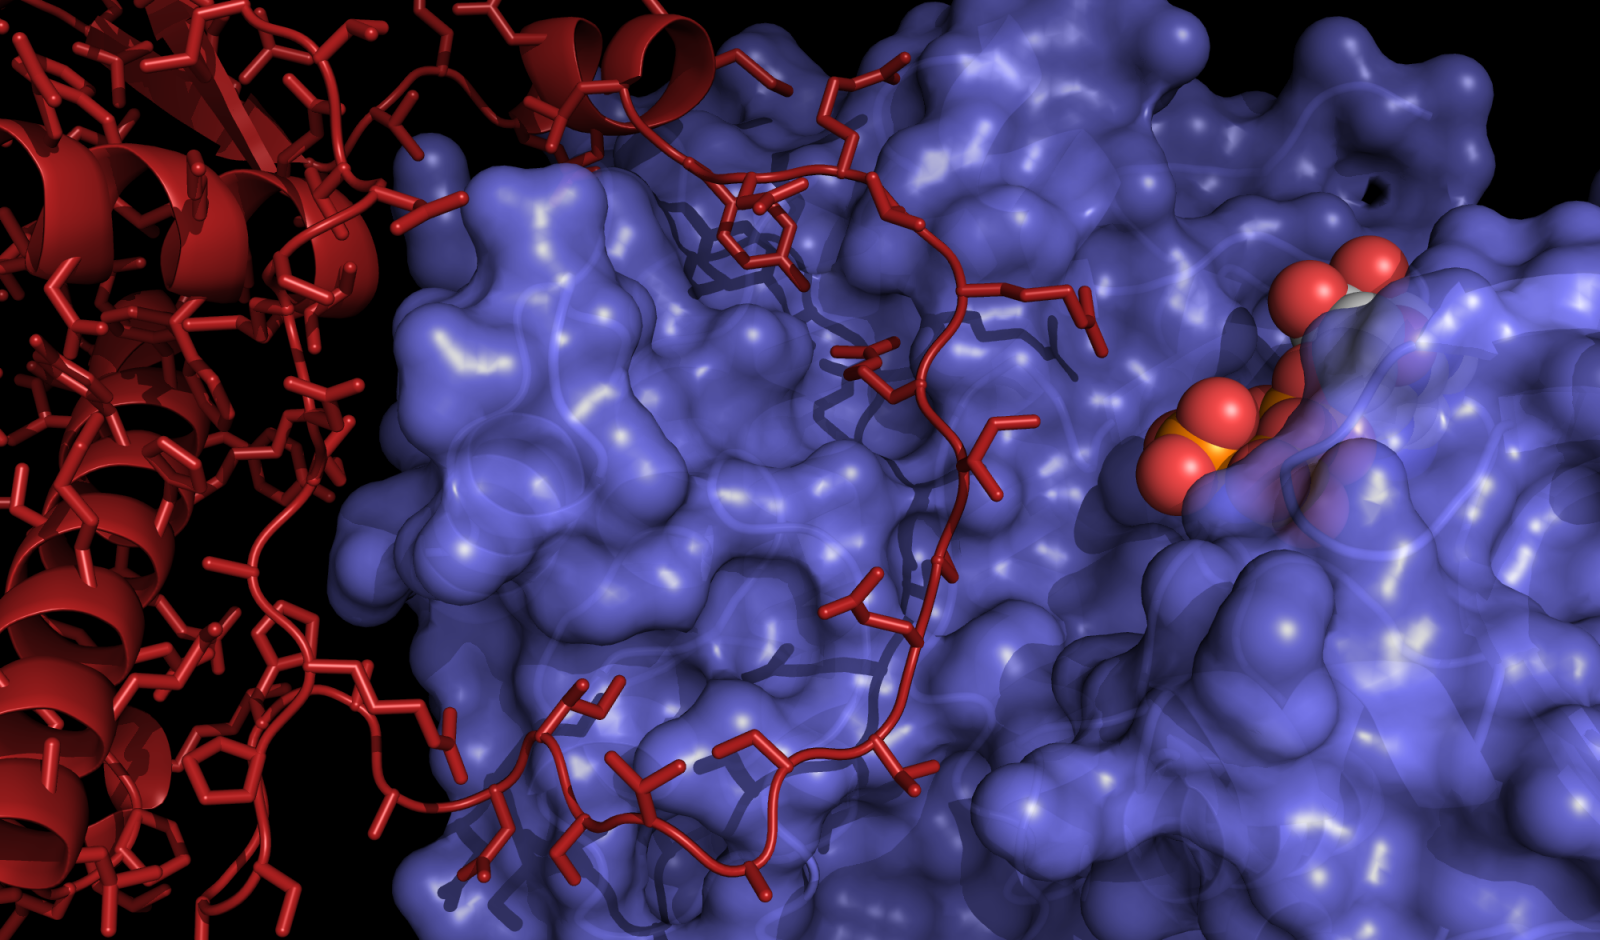 An enzyme, known as 'Protein Kinase A' (blue), delivering the phosphorylation tag to the Ryanodine Receptor domain (red) - the protein that delivers the calcium required for contraction of the heart.